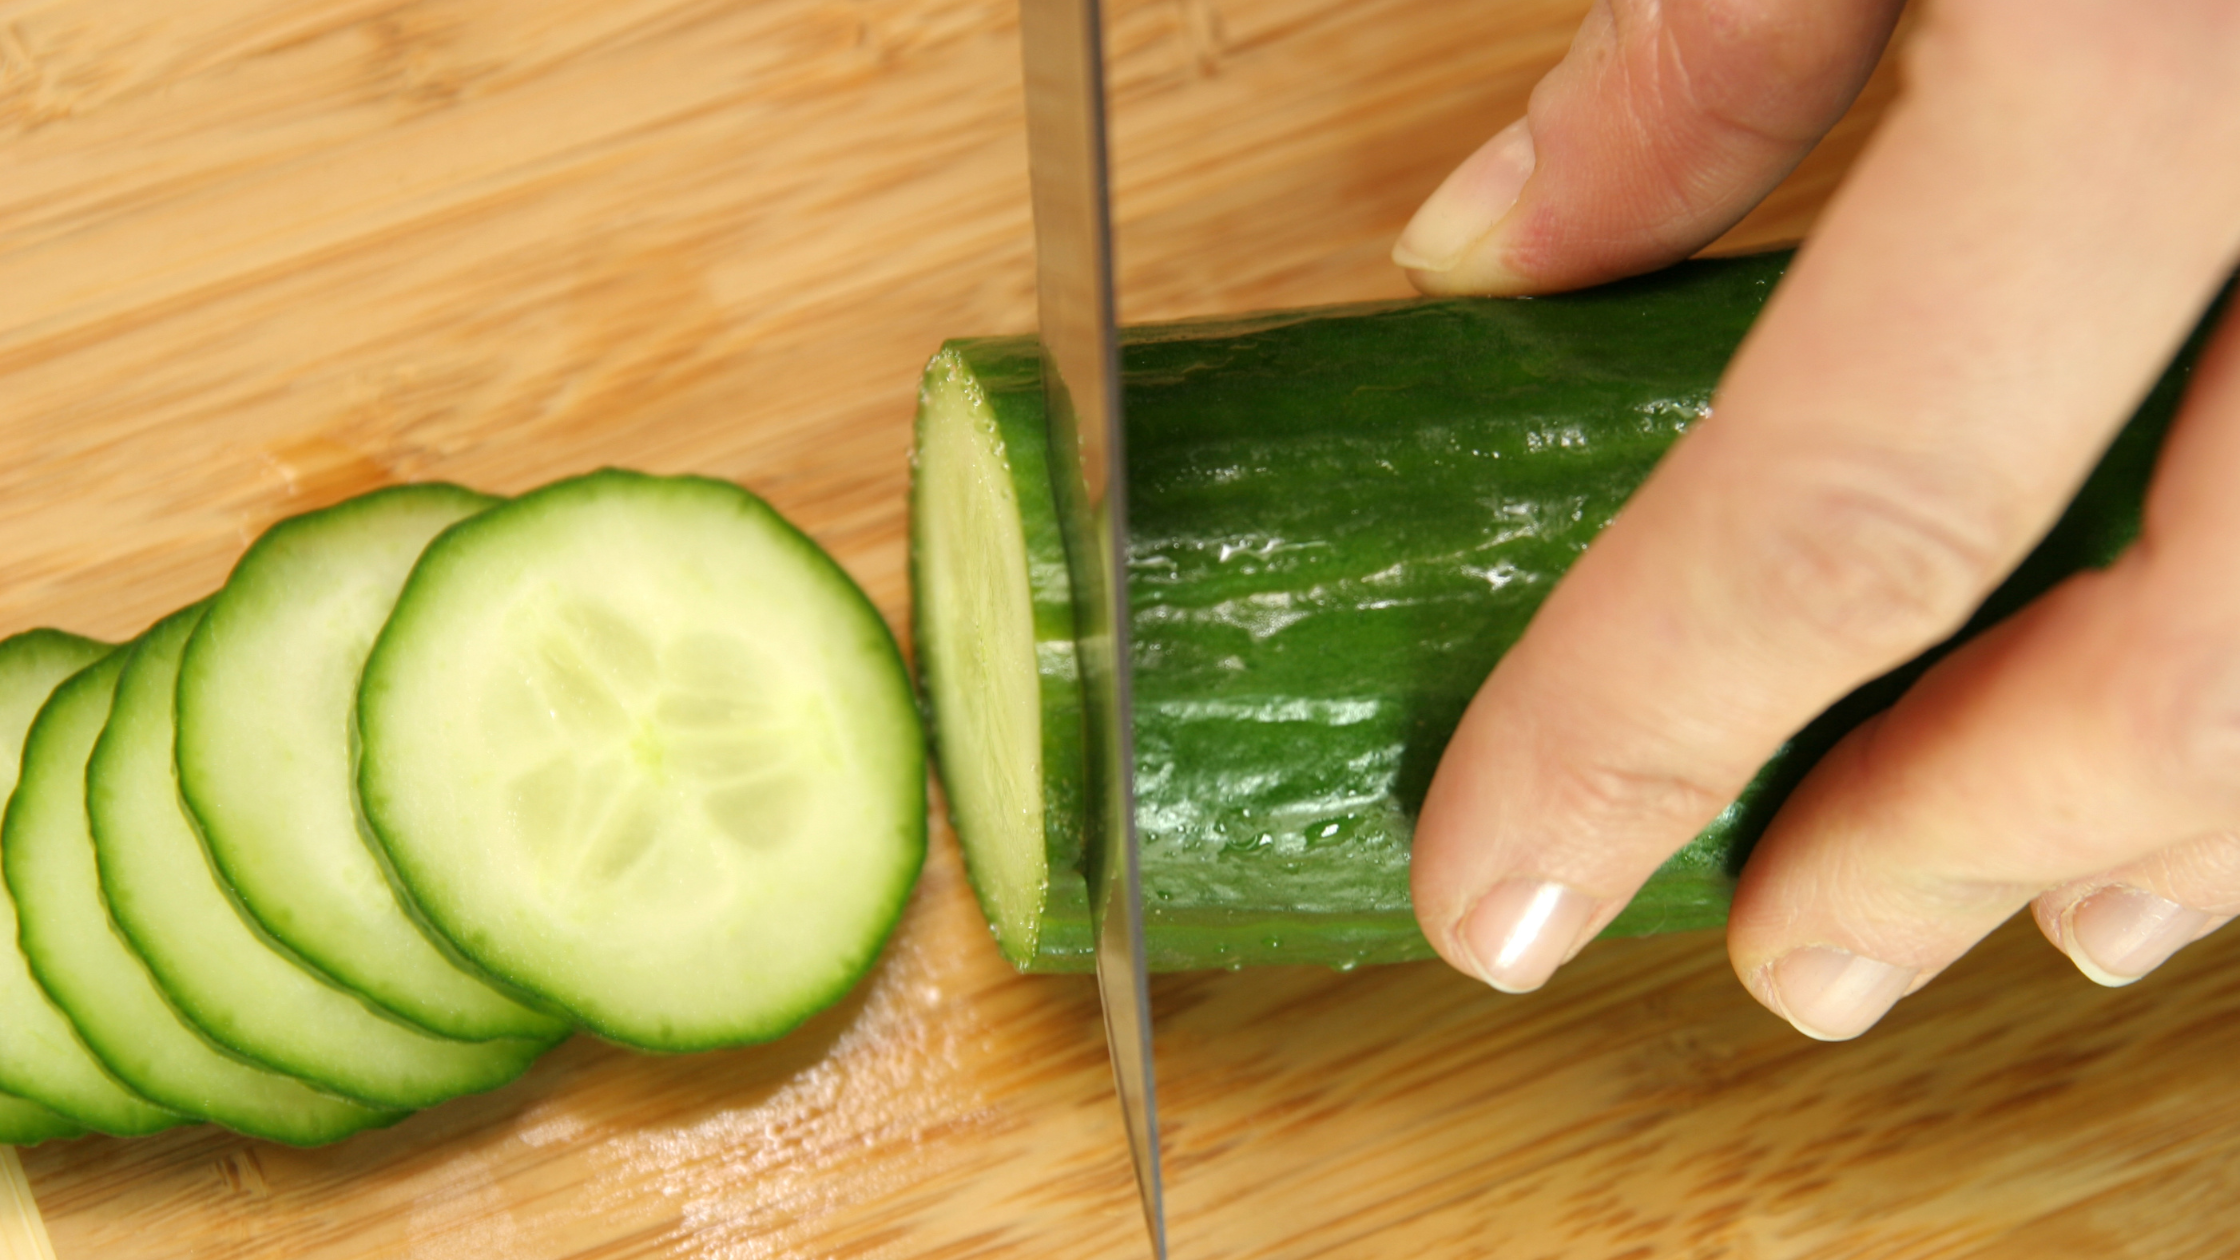 Cutting Cucumbers Like Kendall? 6 Tips for Making Remote Work Life Easier